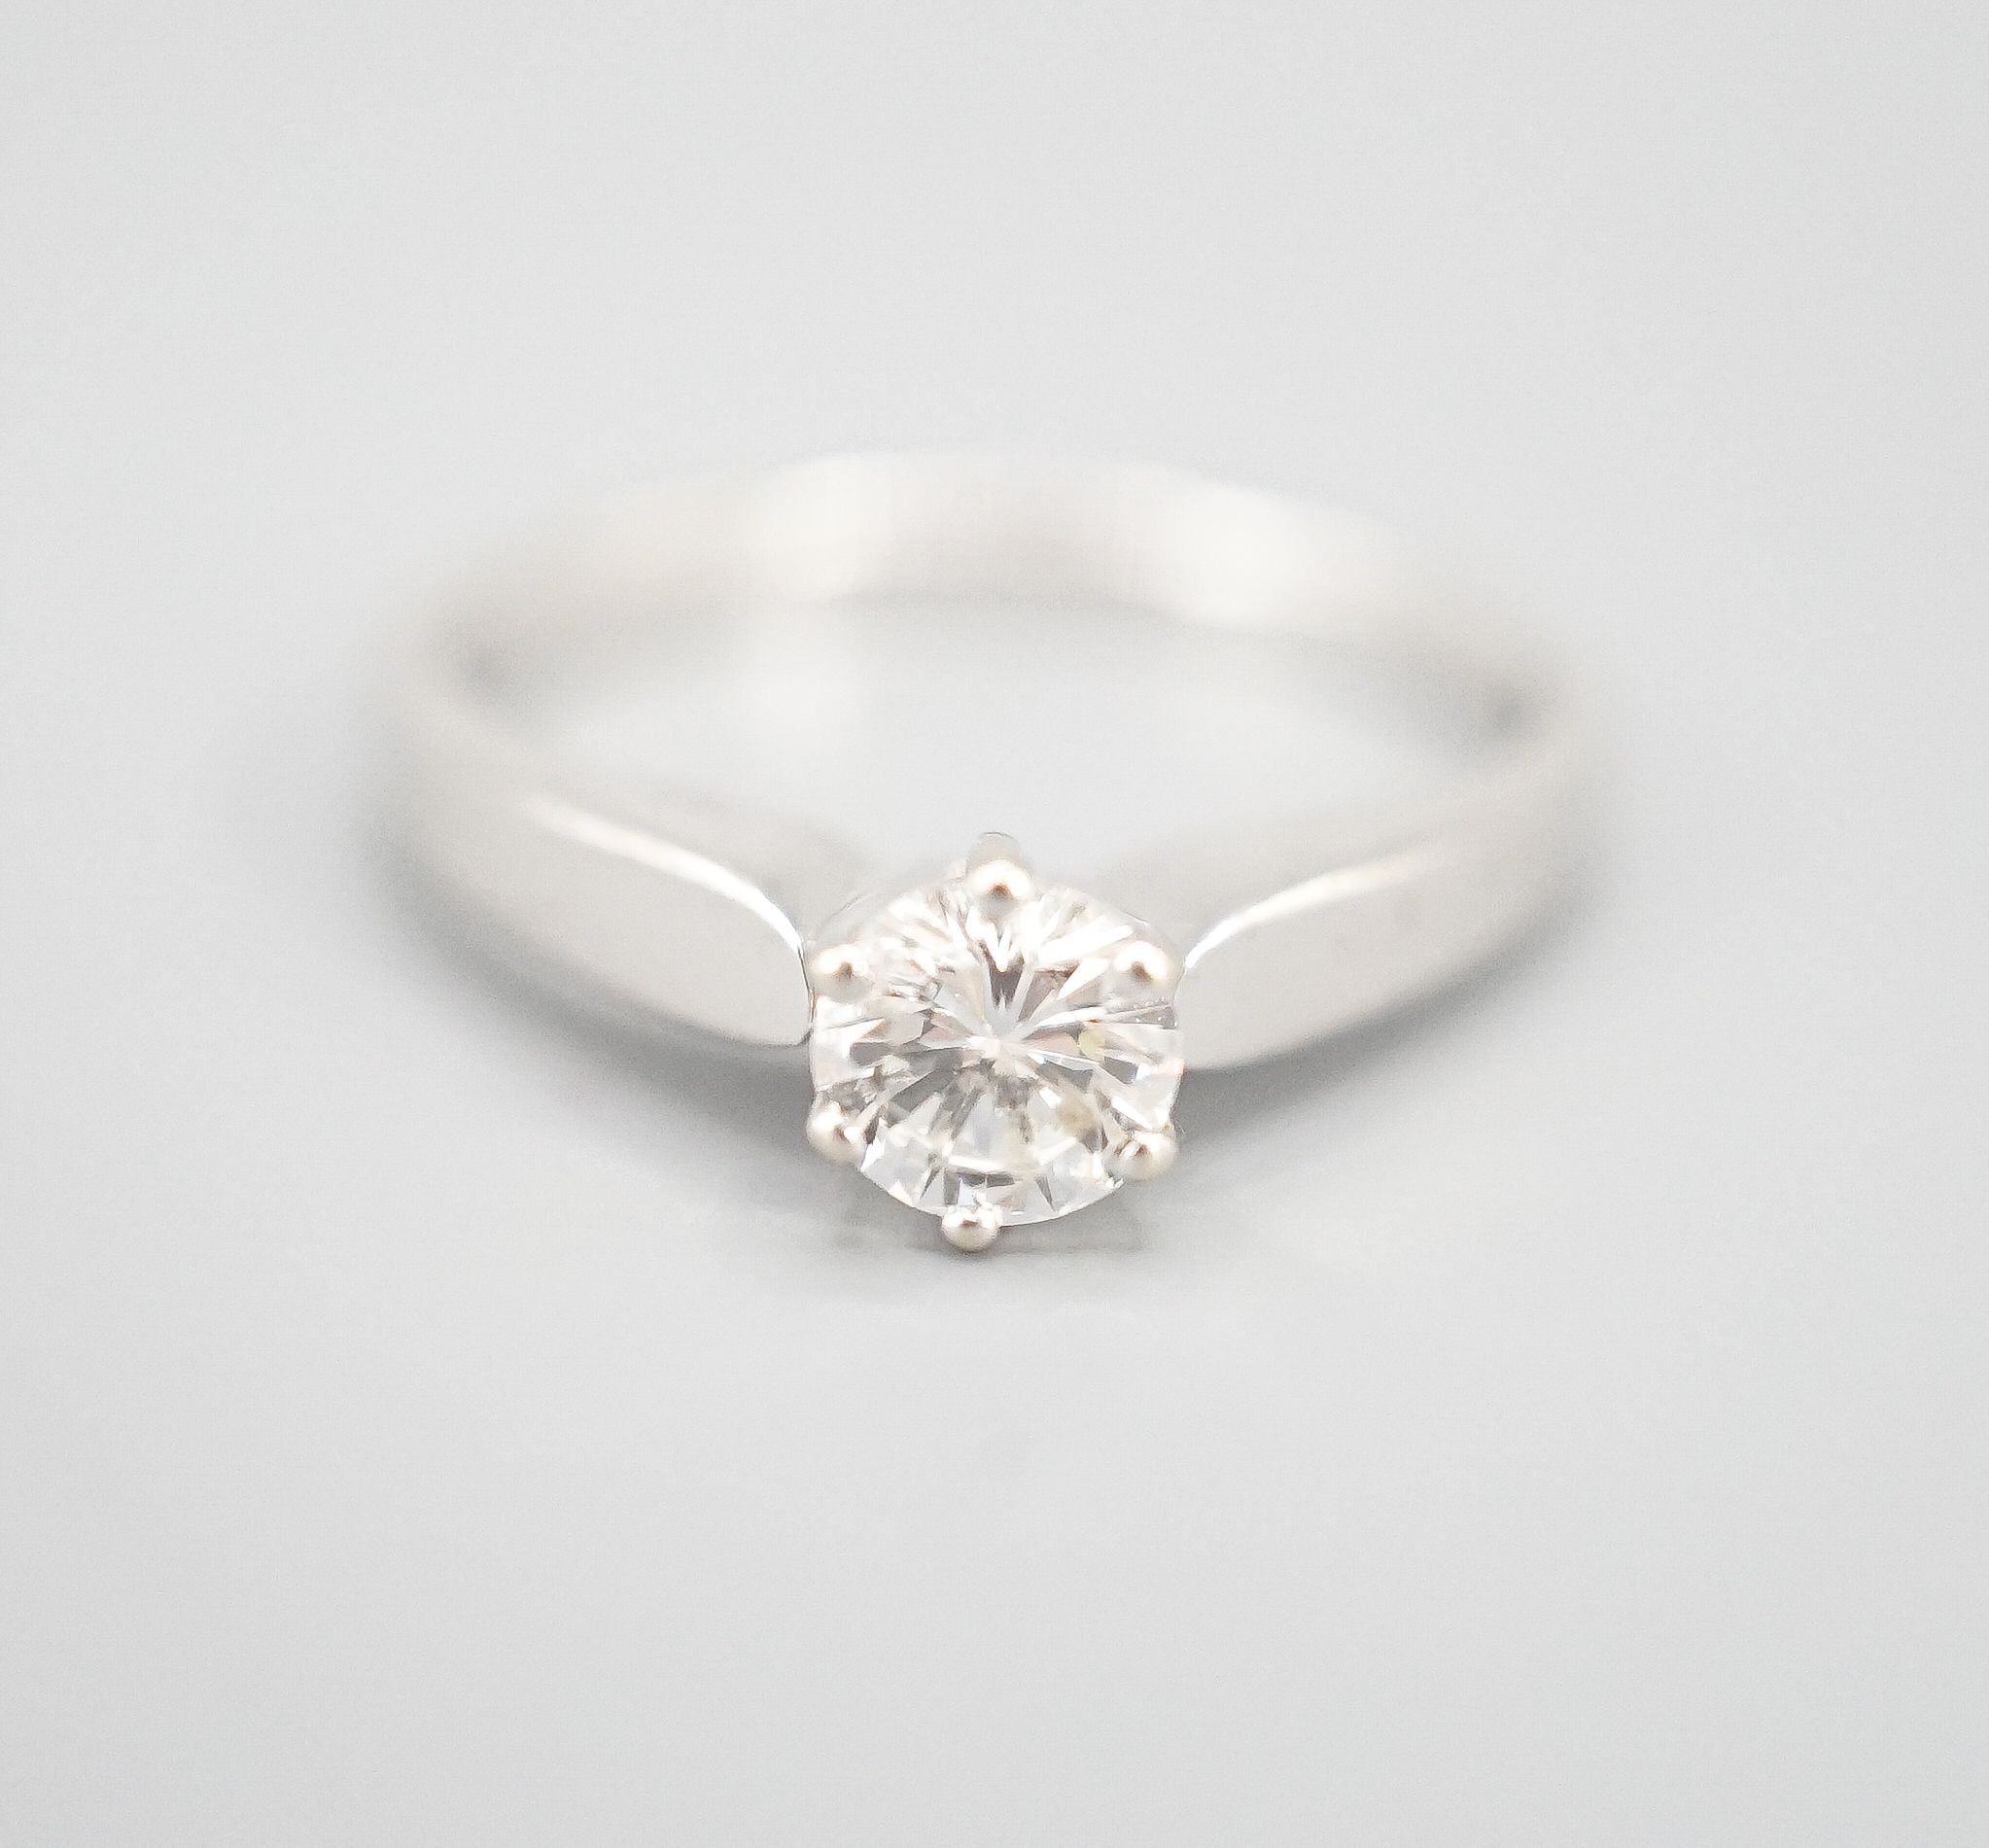 A modern white metal and solitaire diamond ring, size M, gross weight 2.3 grams.